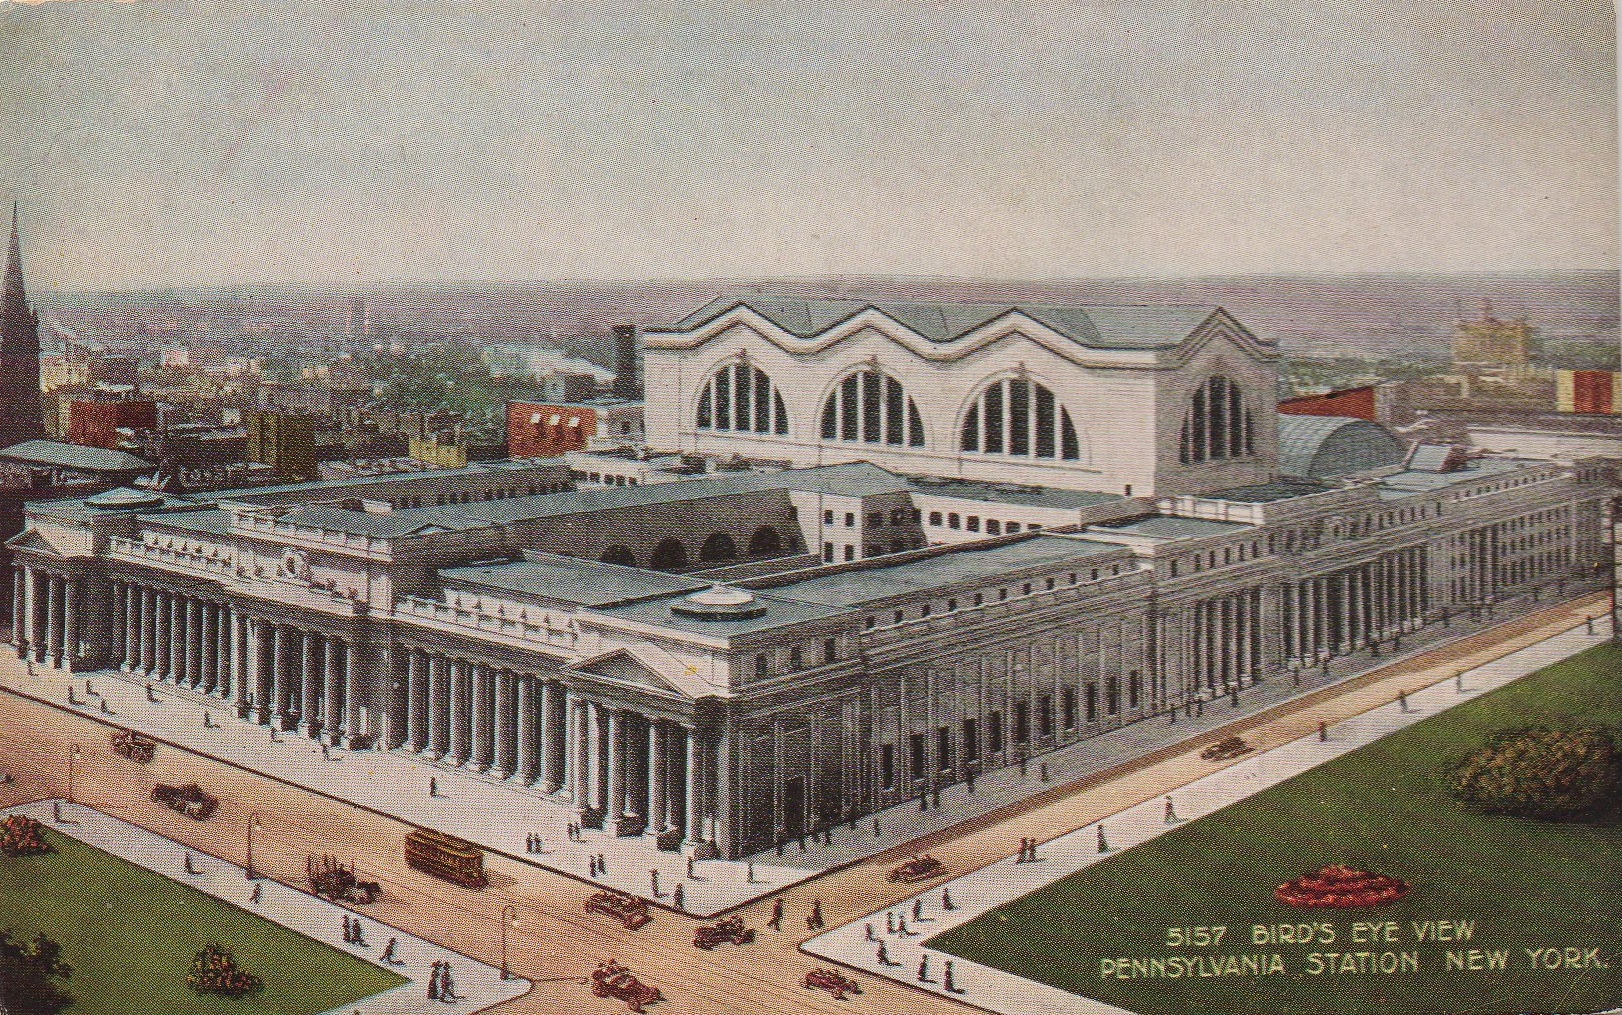 New York's old Pennsylvania Station before it was torn down in 1963.